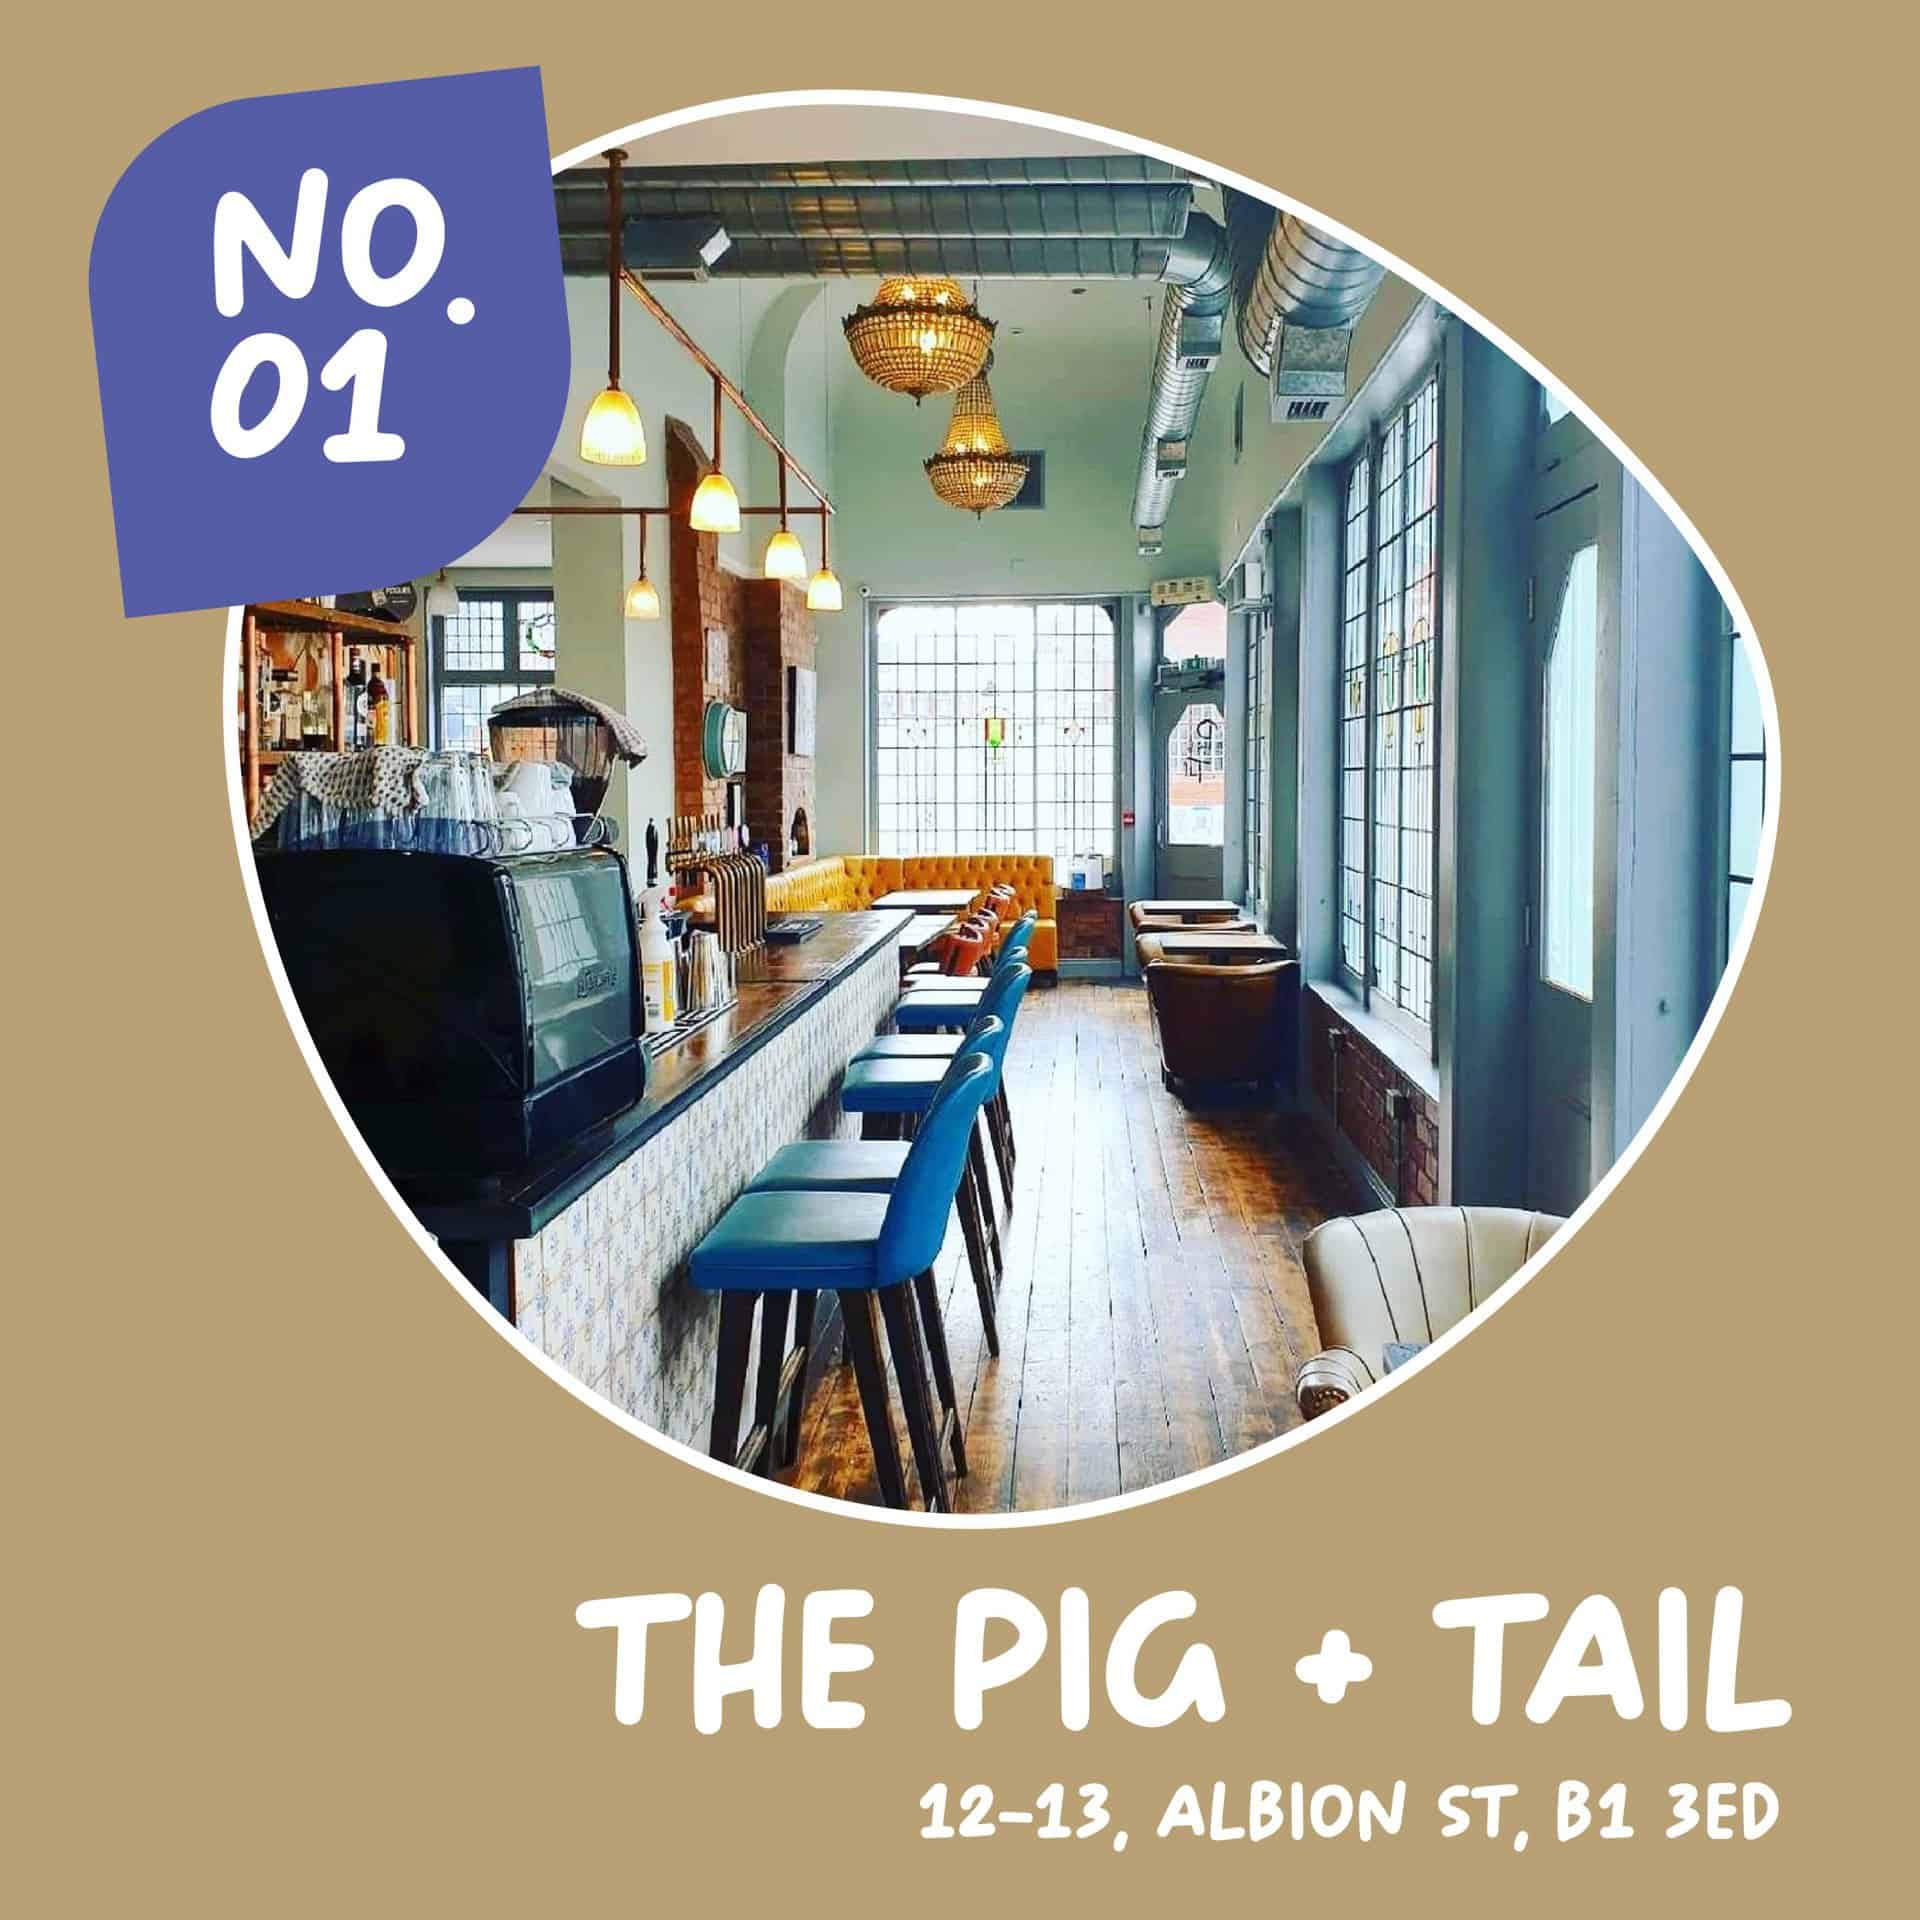 The Pig and Tail